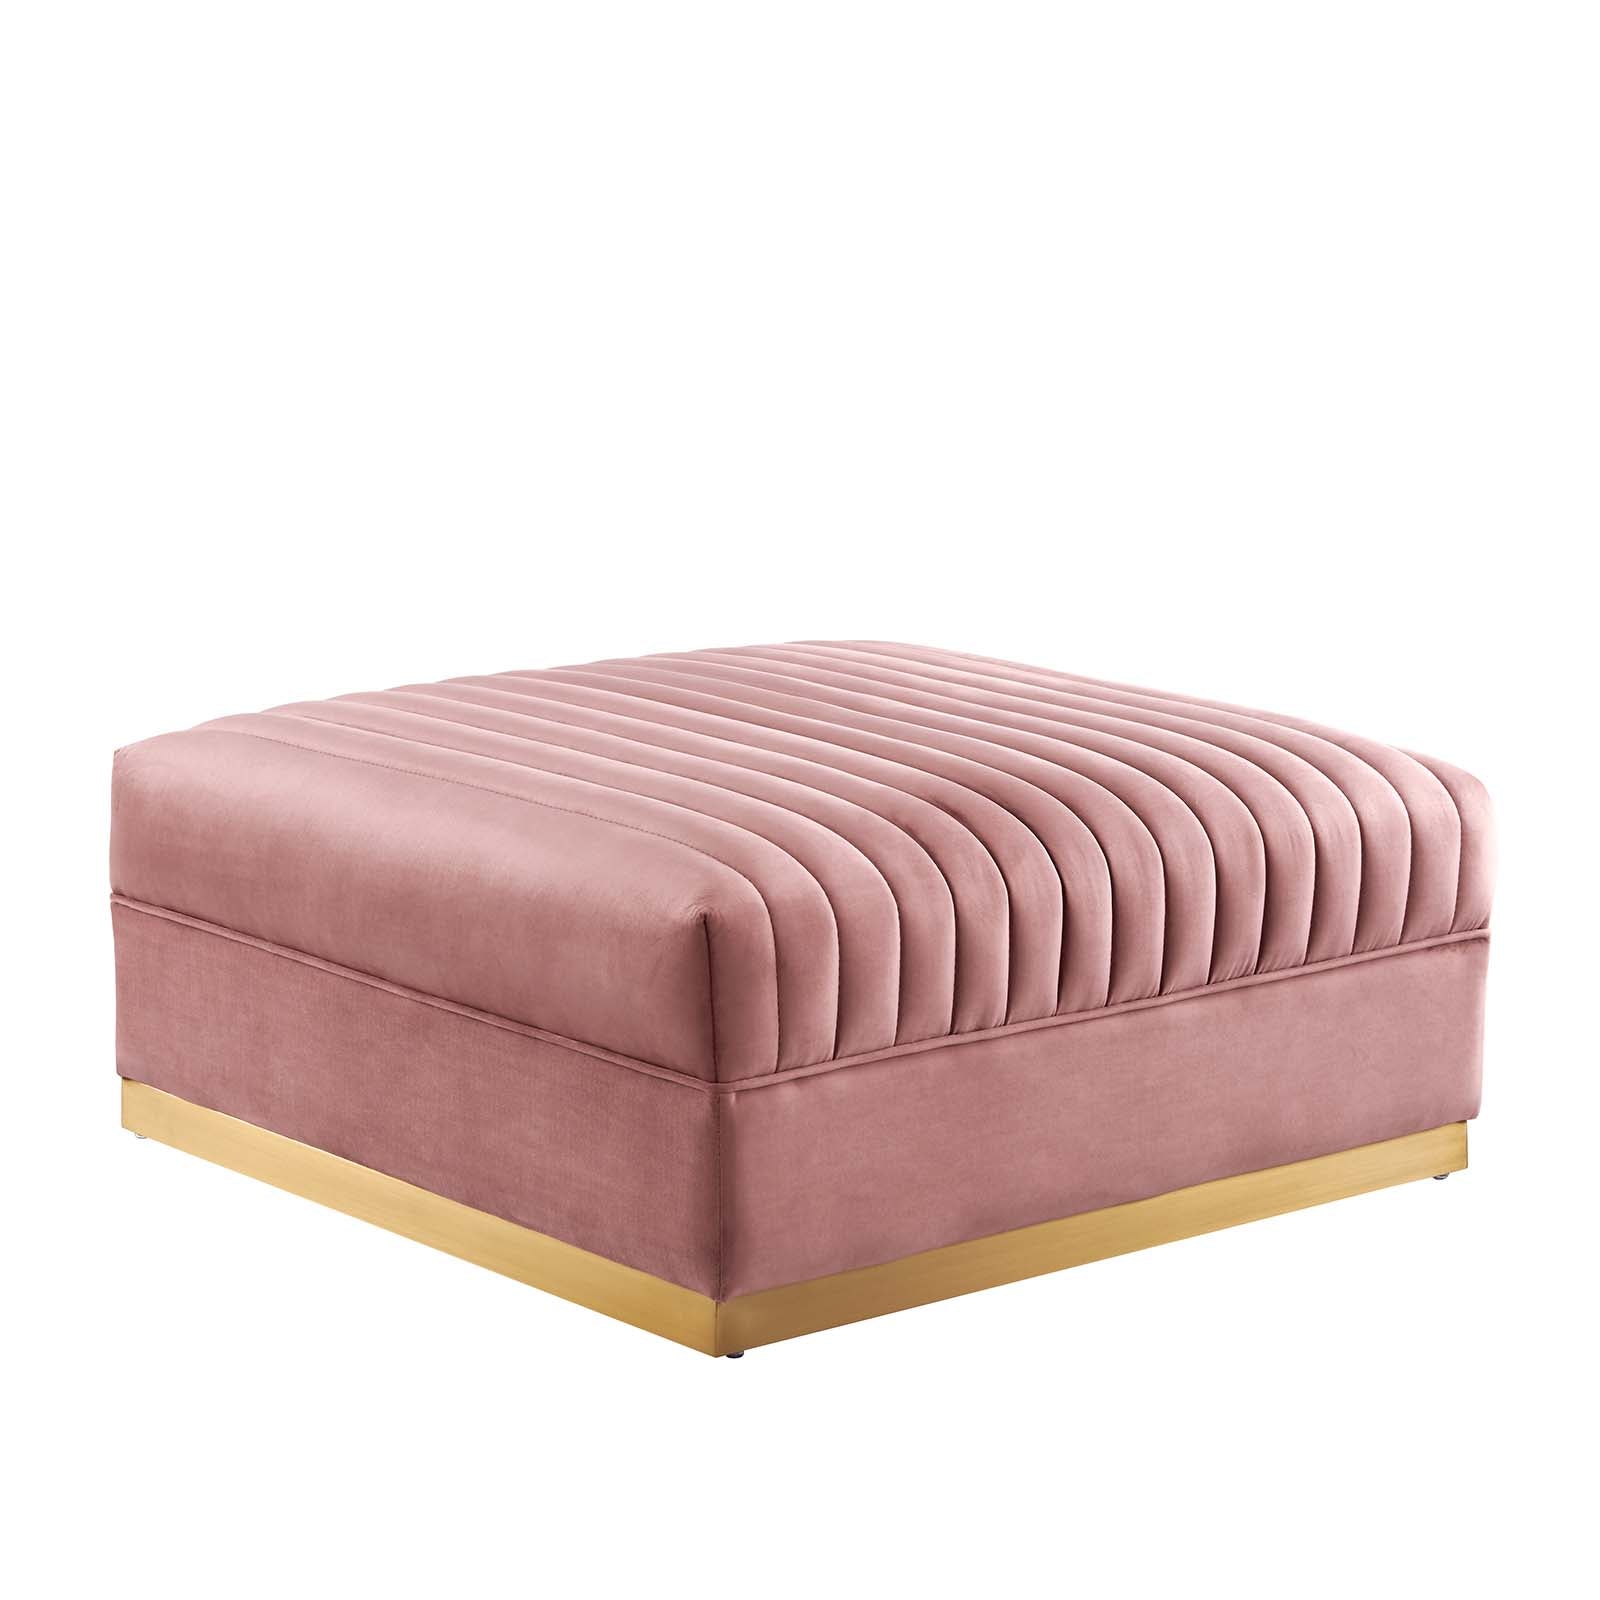 Modway Sectional Sofas - Sanguine Channel Tufted Performance Velvet 5 Piece Left-Facing Modular Sectional Sofa Dusty Rose